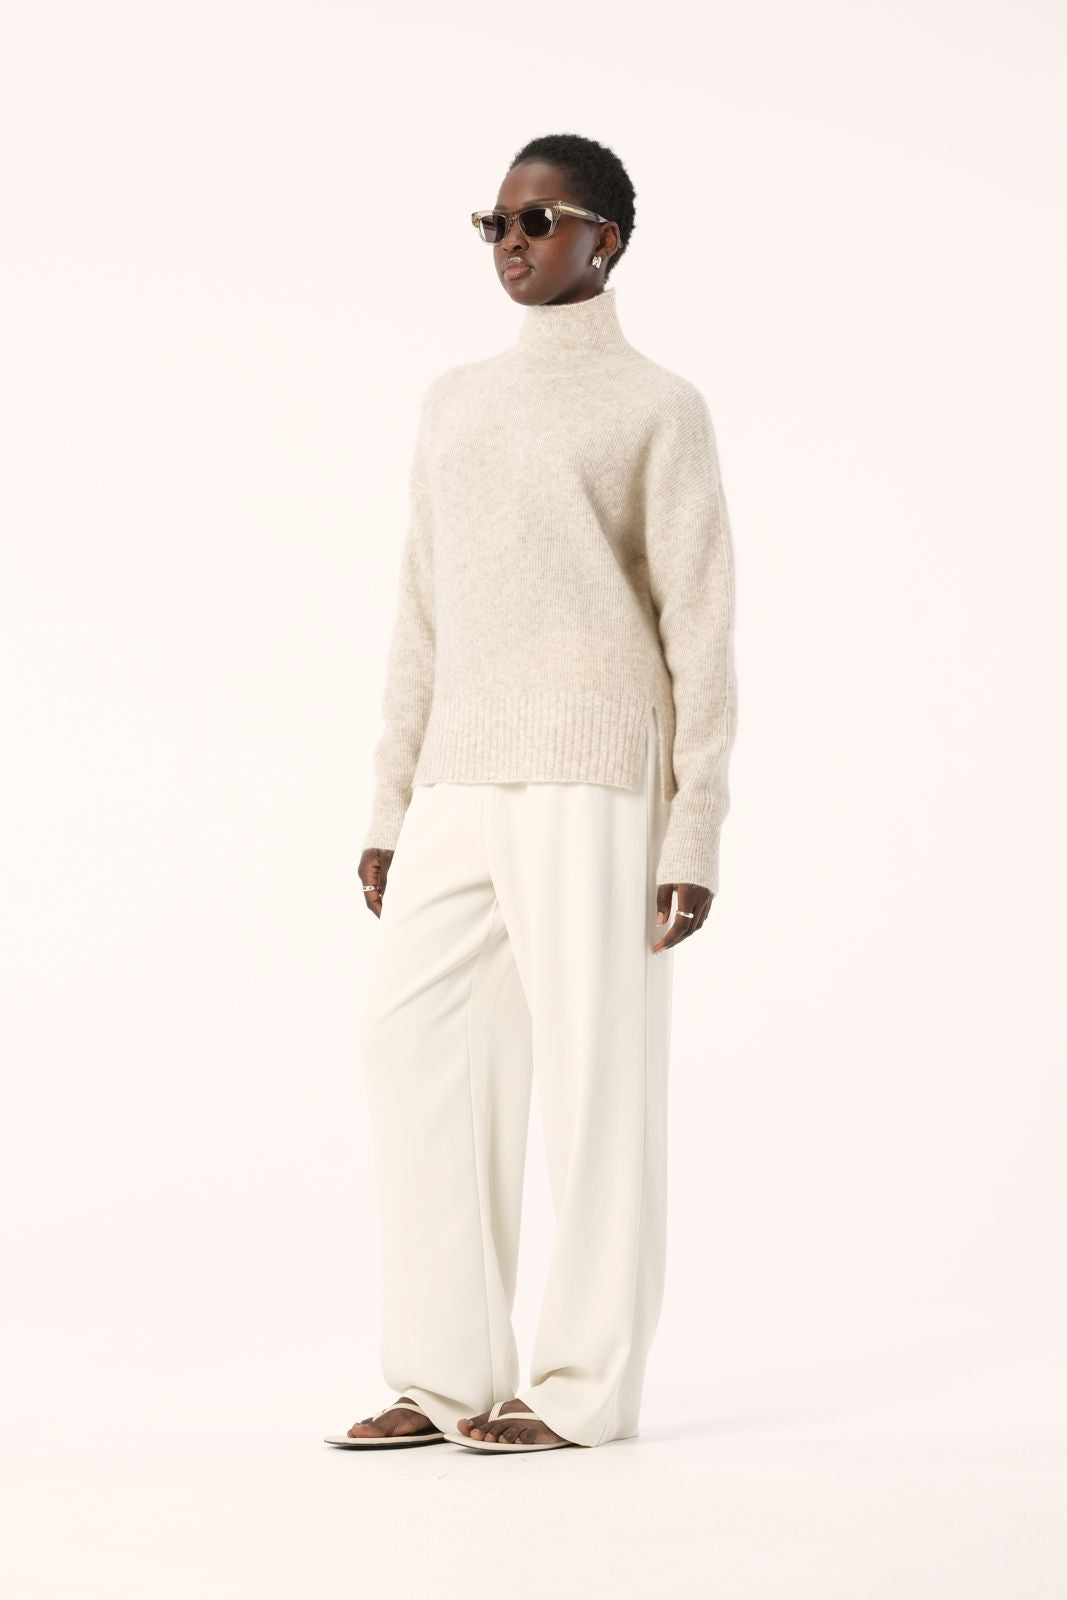 ASTA KNIT - WHITE MARLE - ELKA COLLECTIVE